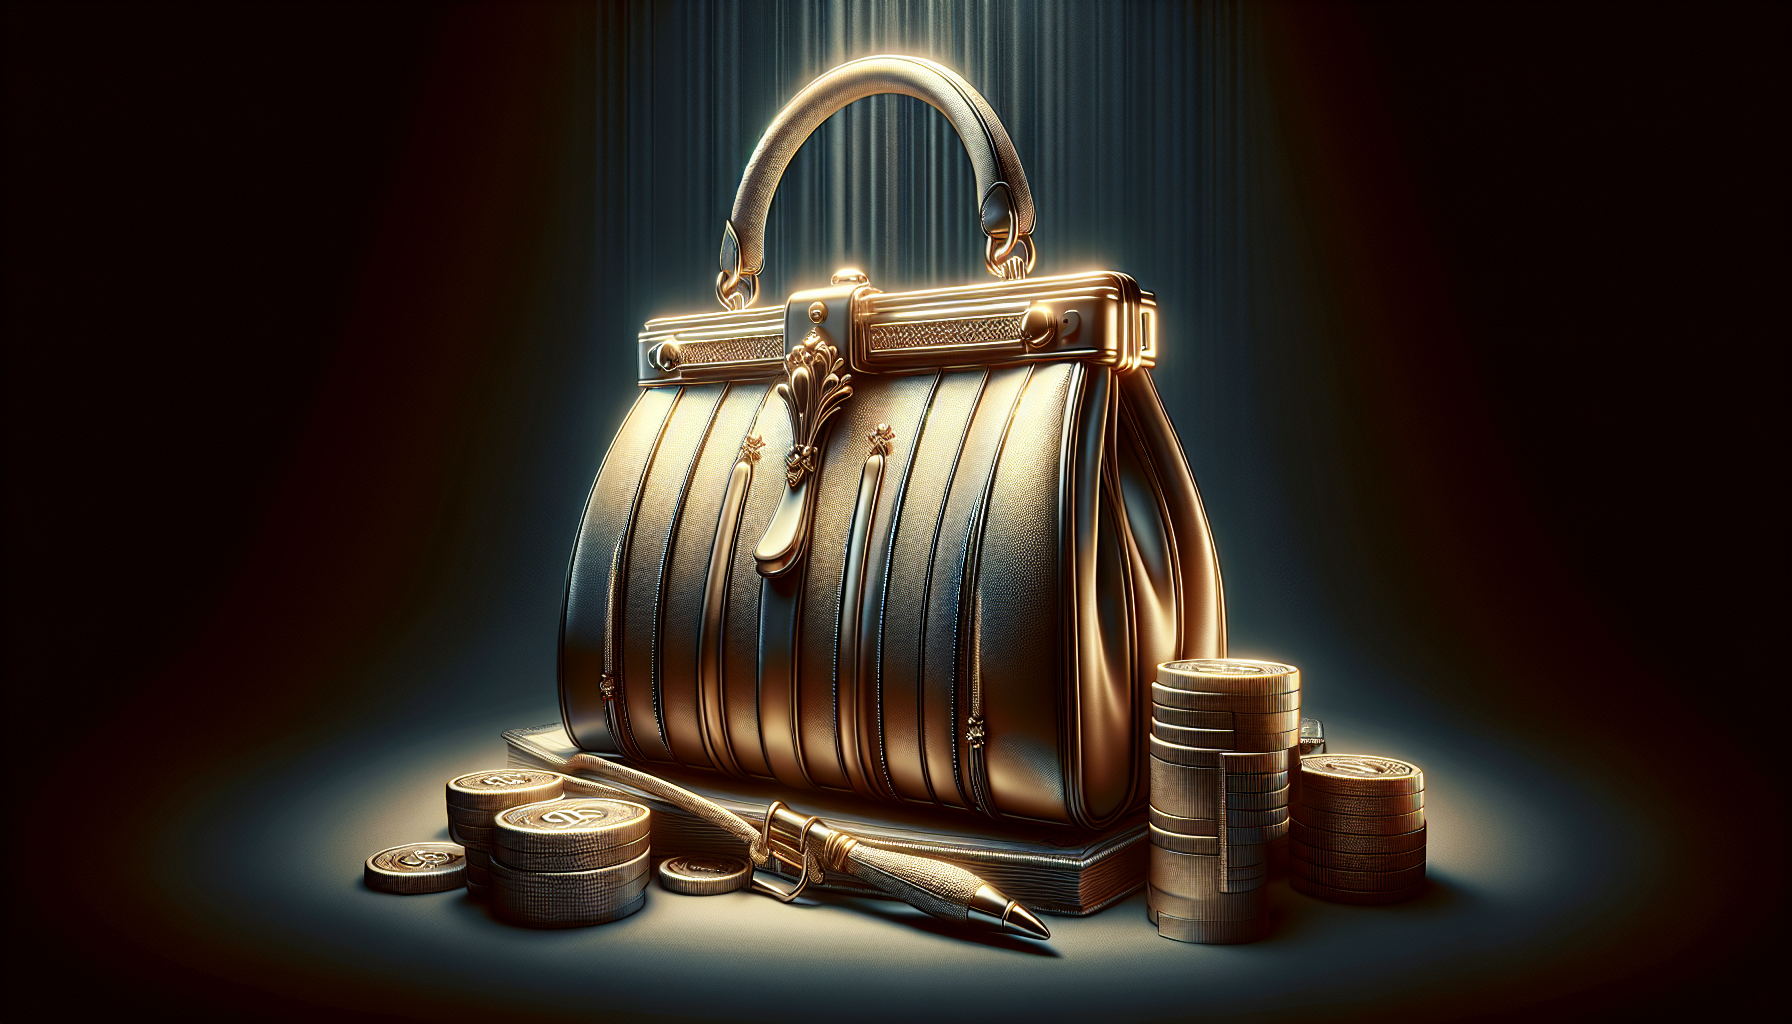 What Are The Risks Associated With Bag Investments?